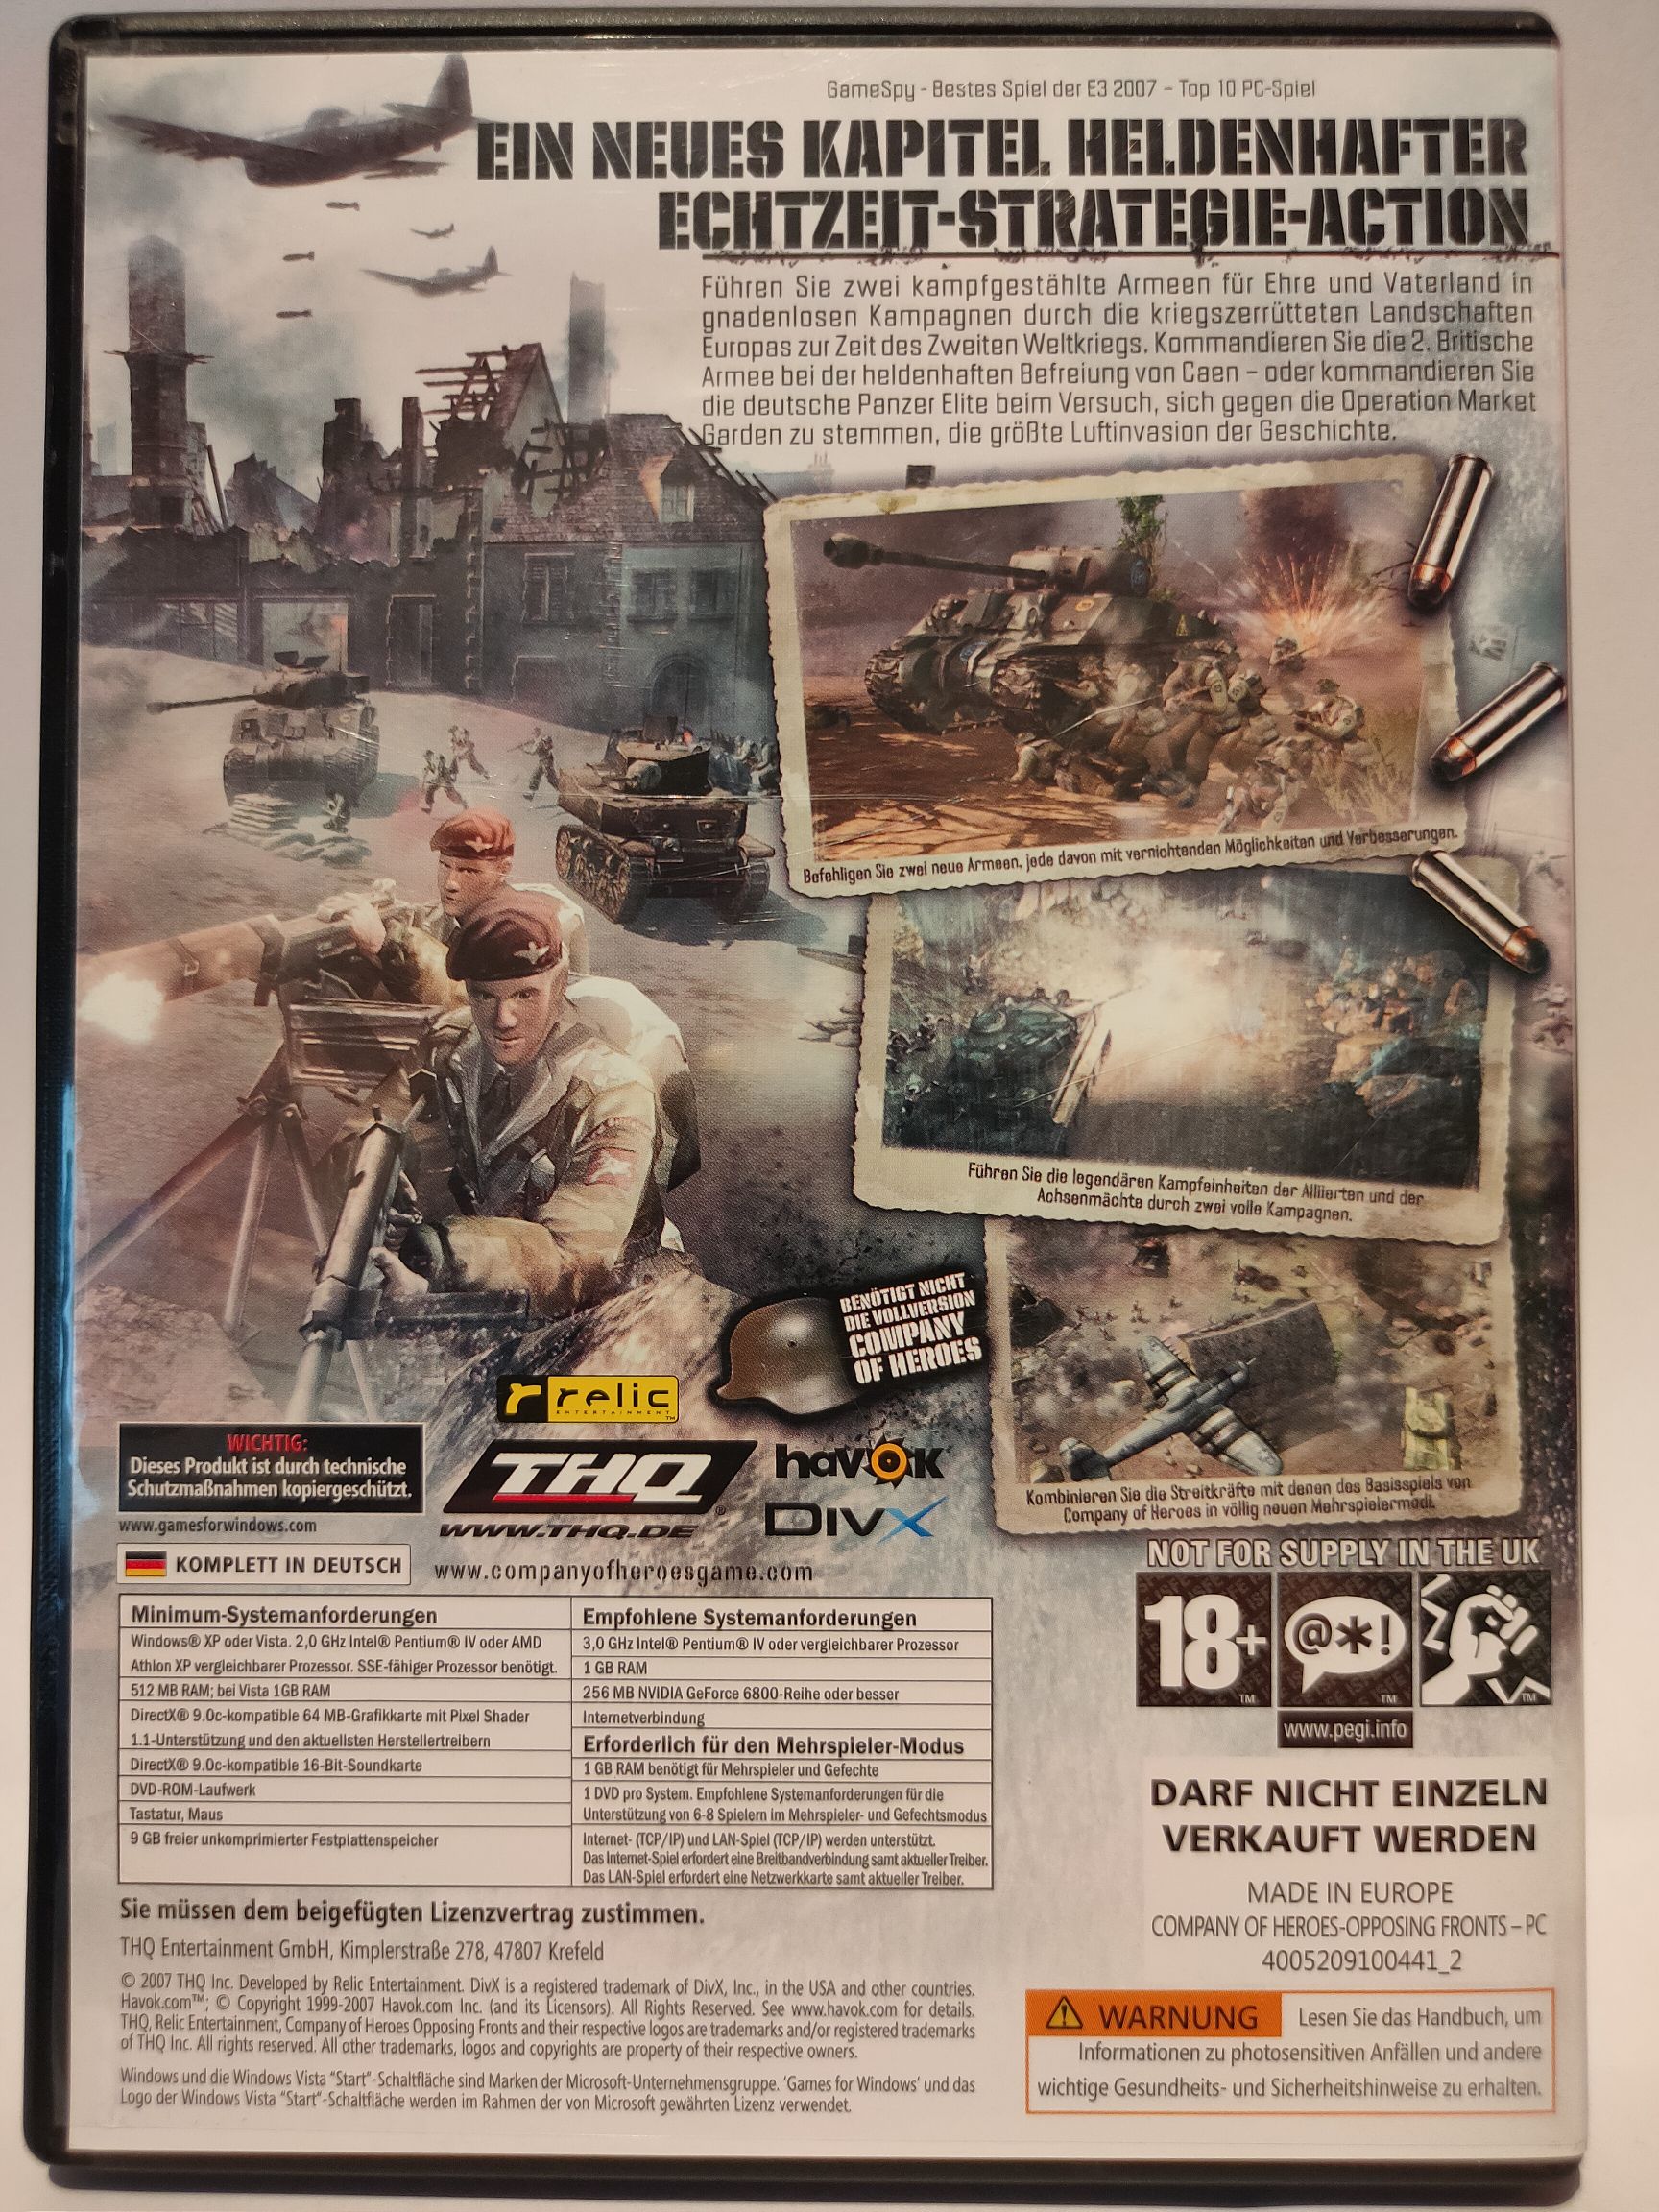 Company Of Heroes: Opposing Fronts - PC (SEGA CORPORATION) video game collectible [Barcode 4005209097215] - Main Image 2